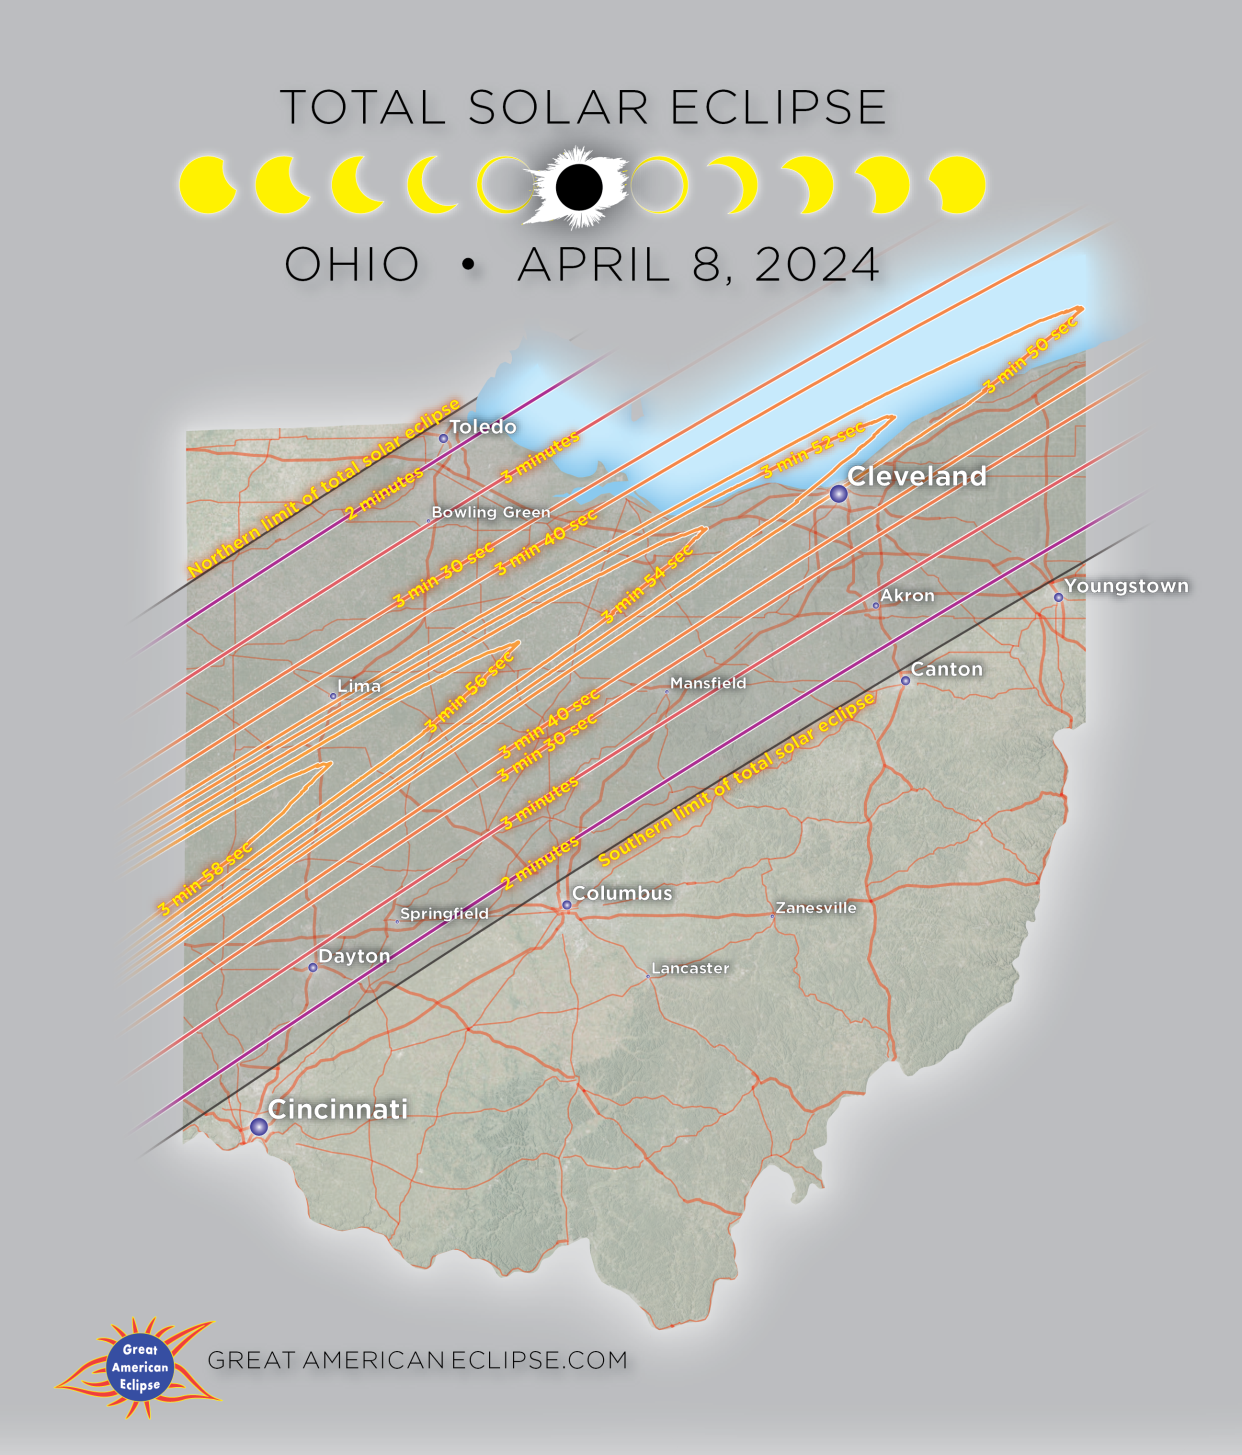 A map showing the total solar eclipse's path through Ohio.